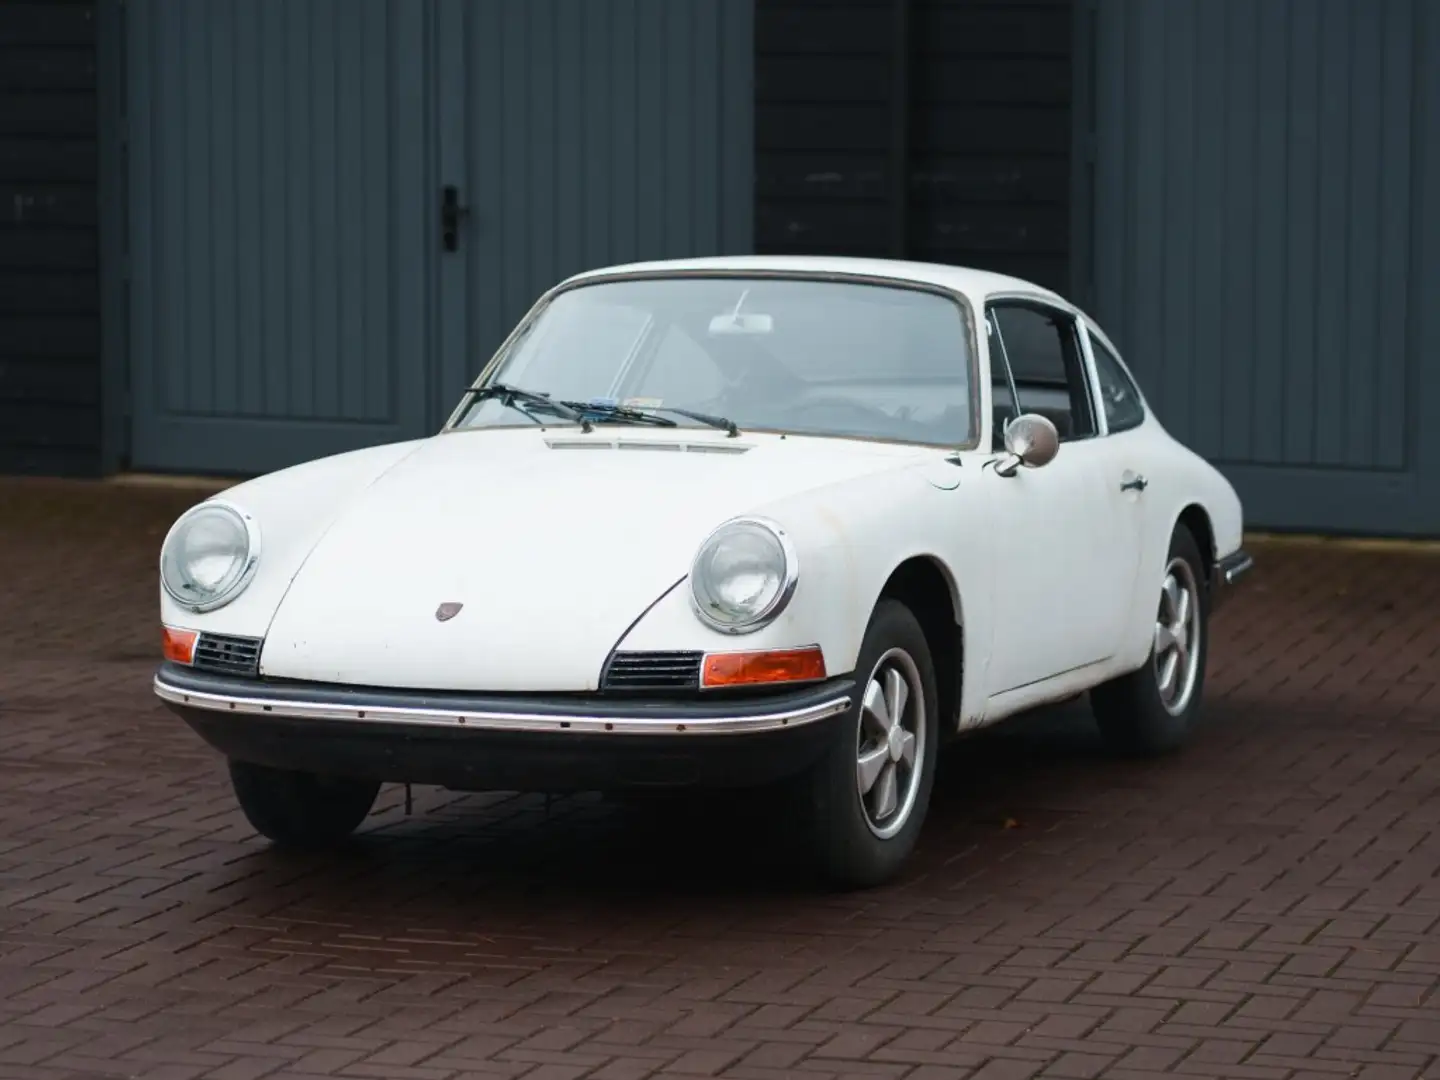 Porsche 912 Coupe late 1965 early 66 model Weiß - 1